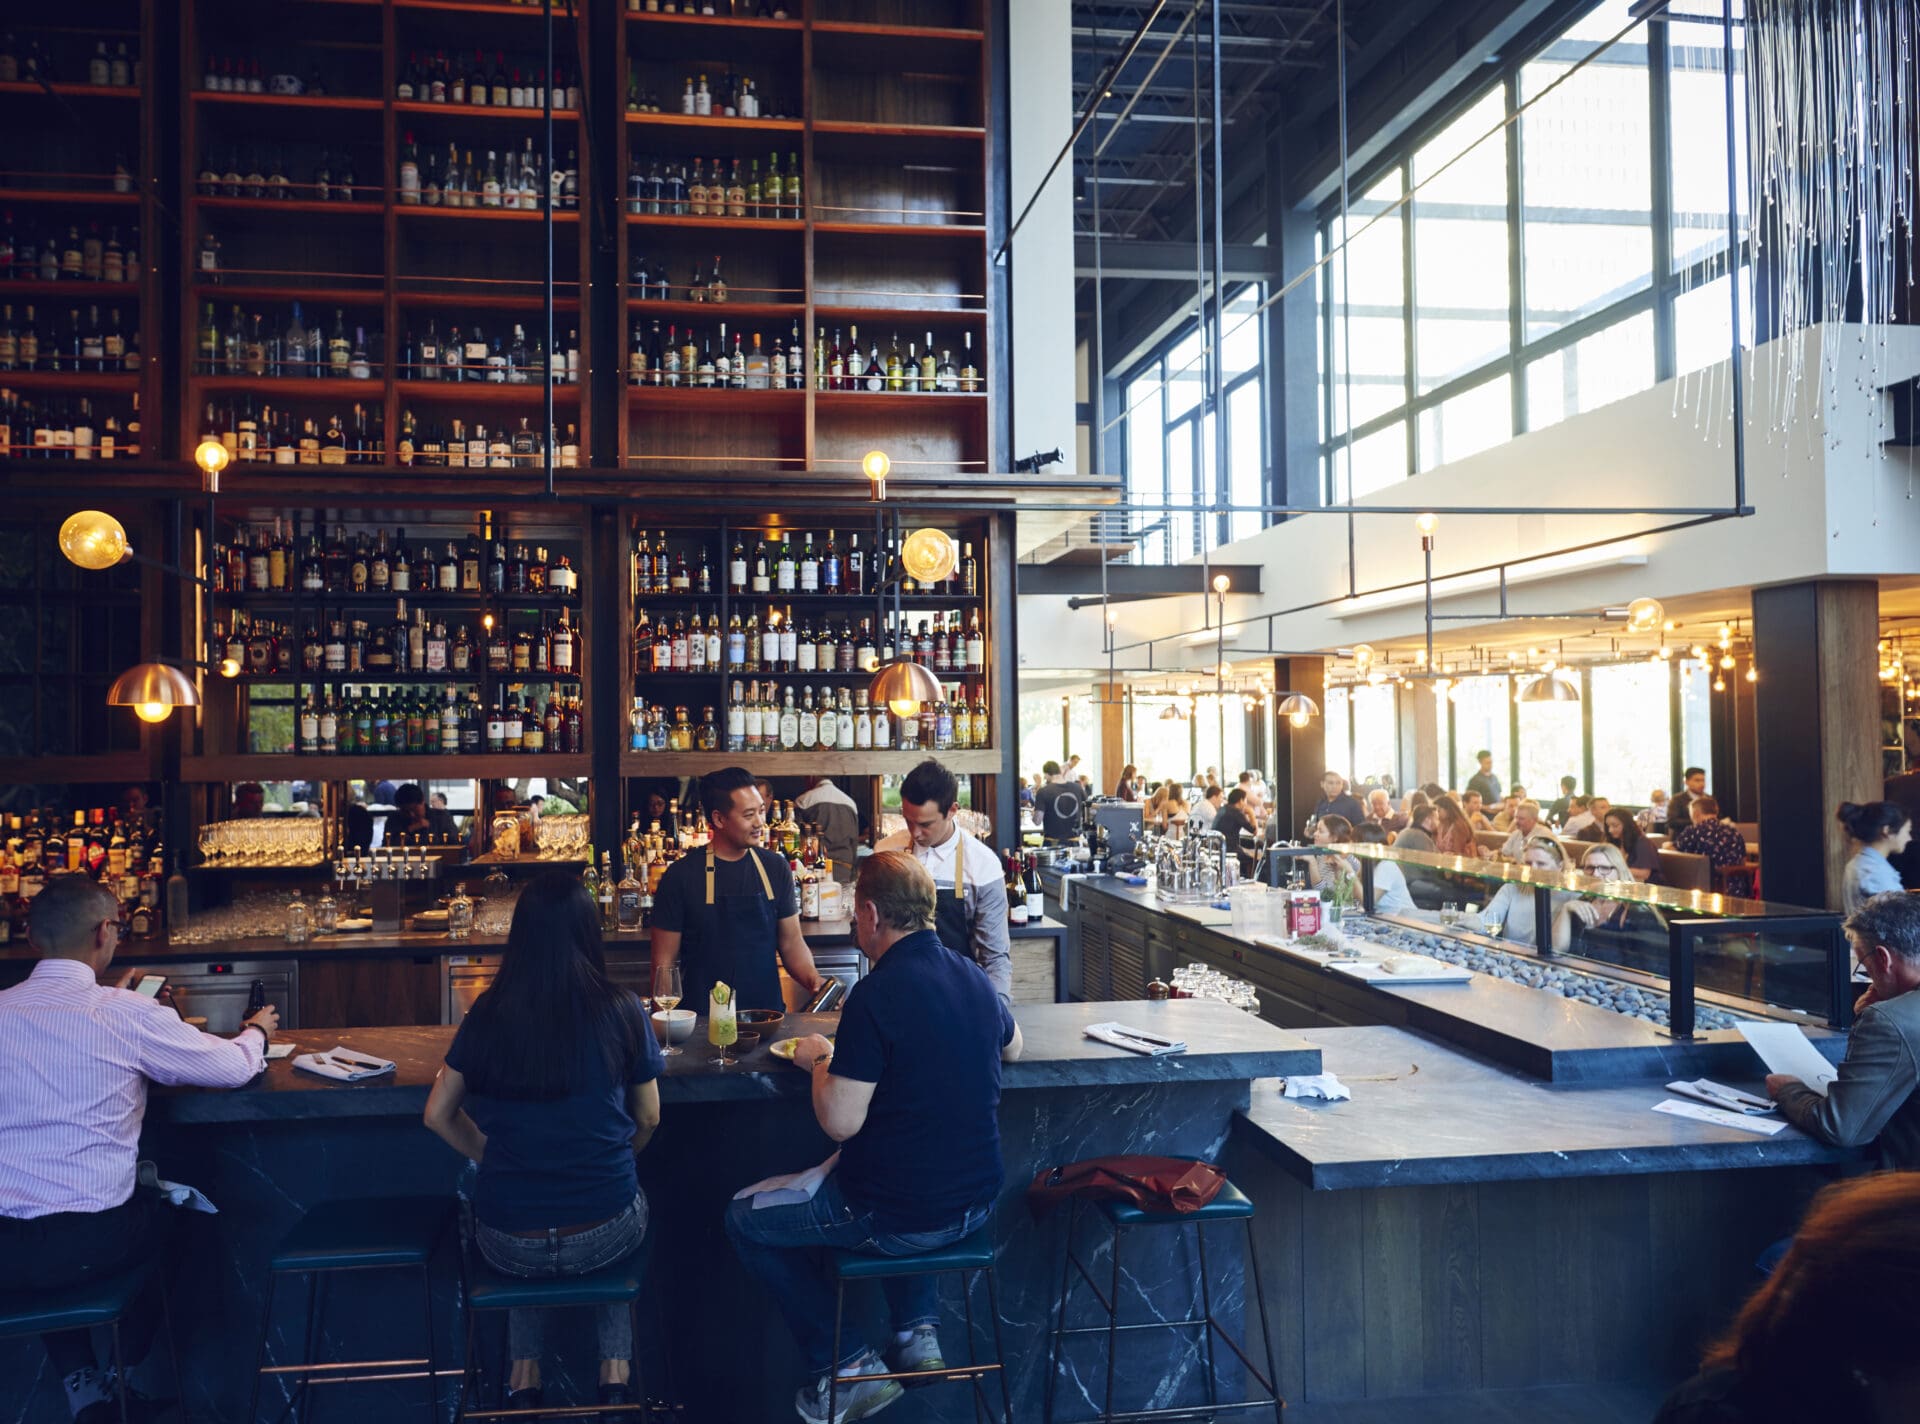 LA's best restaurants | A scene inside Otium, with people sat drinking at the bar, where tall shelves with bottles of spirits rise to the high ceiling